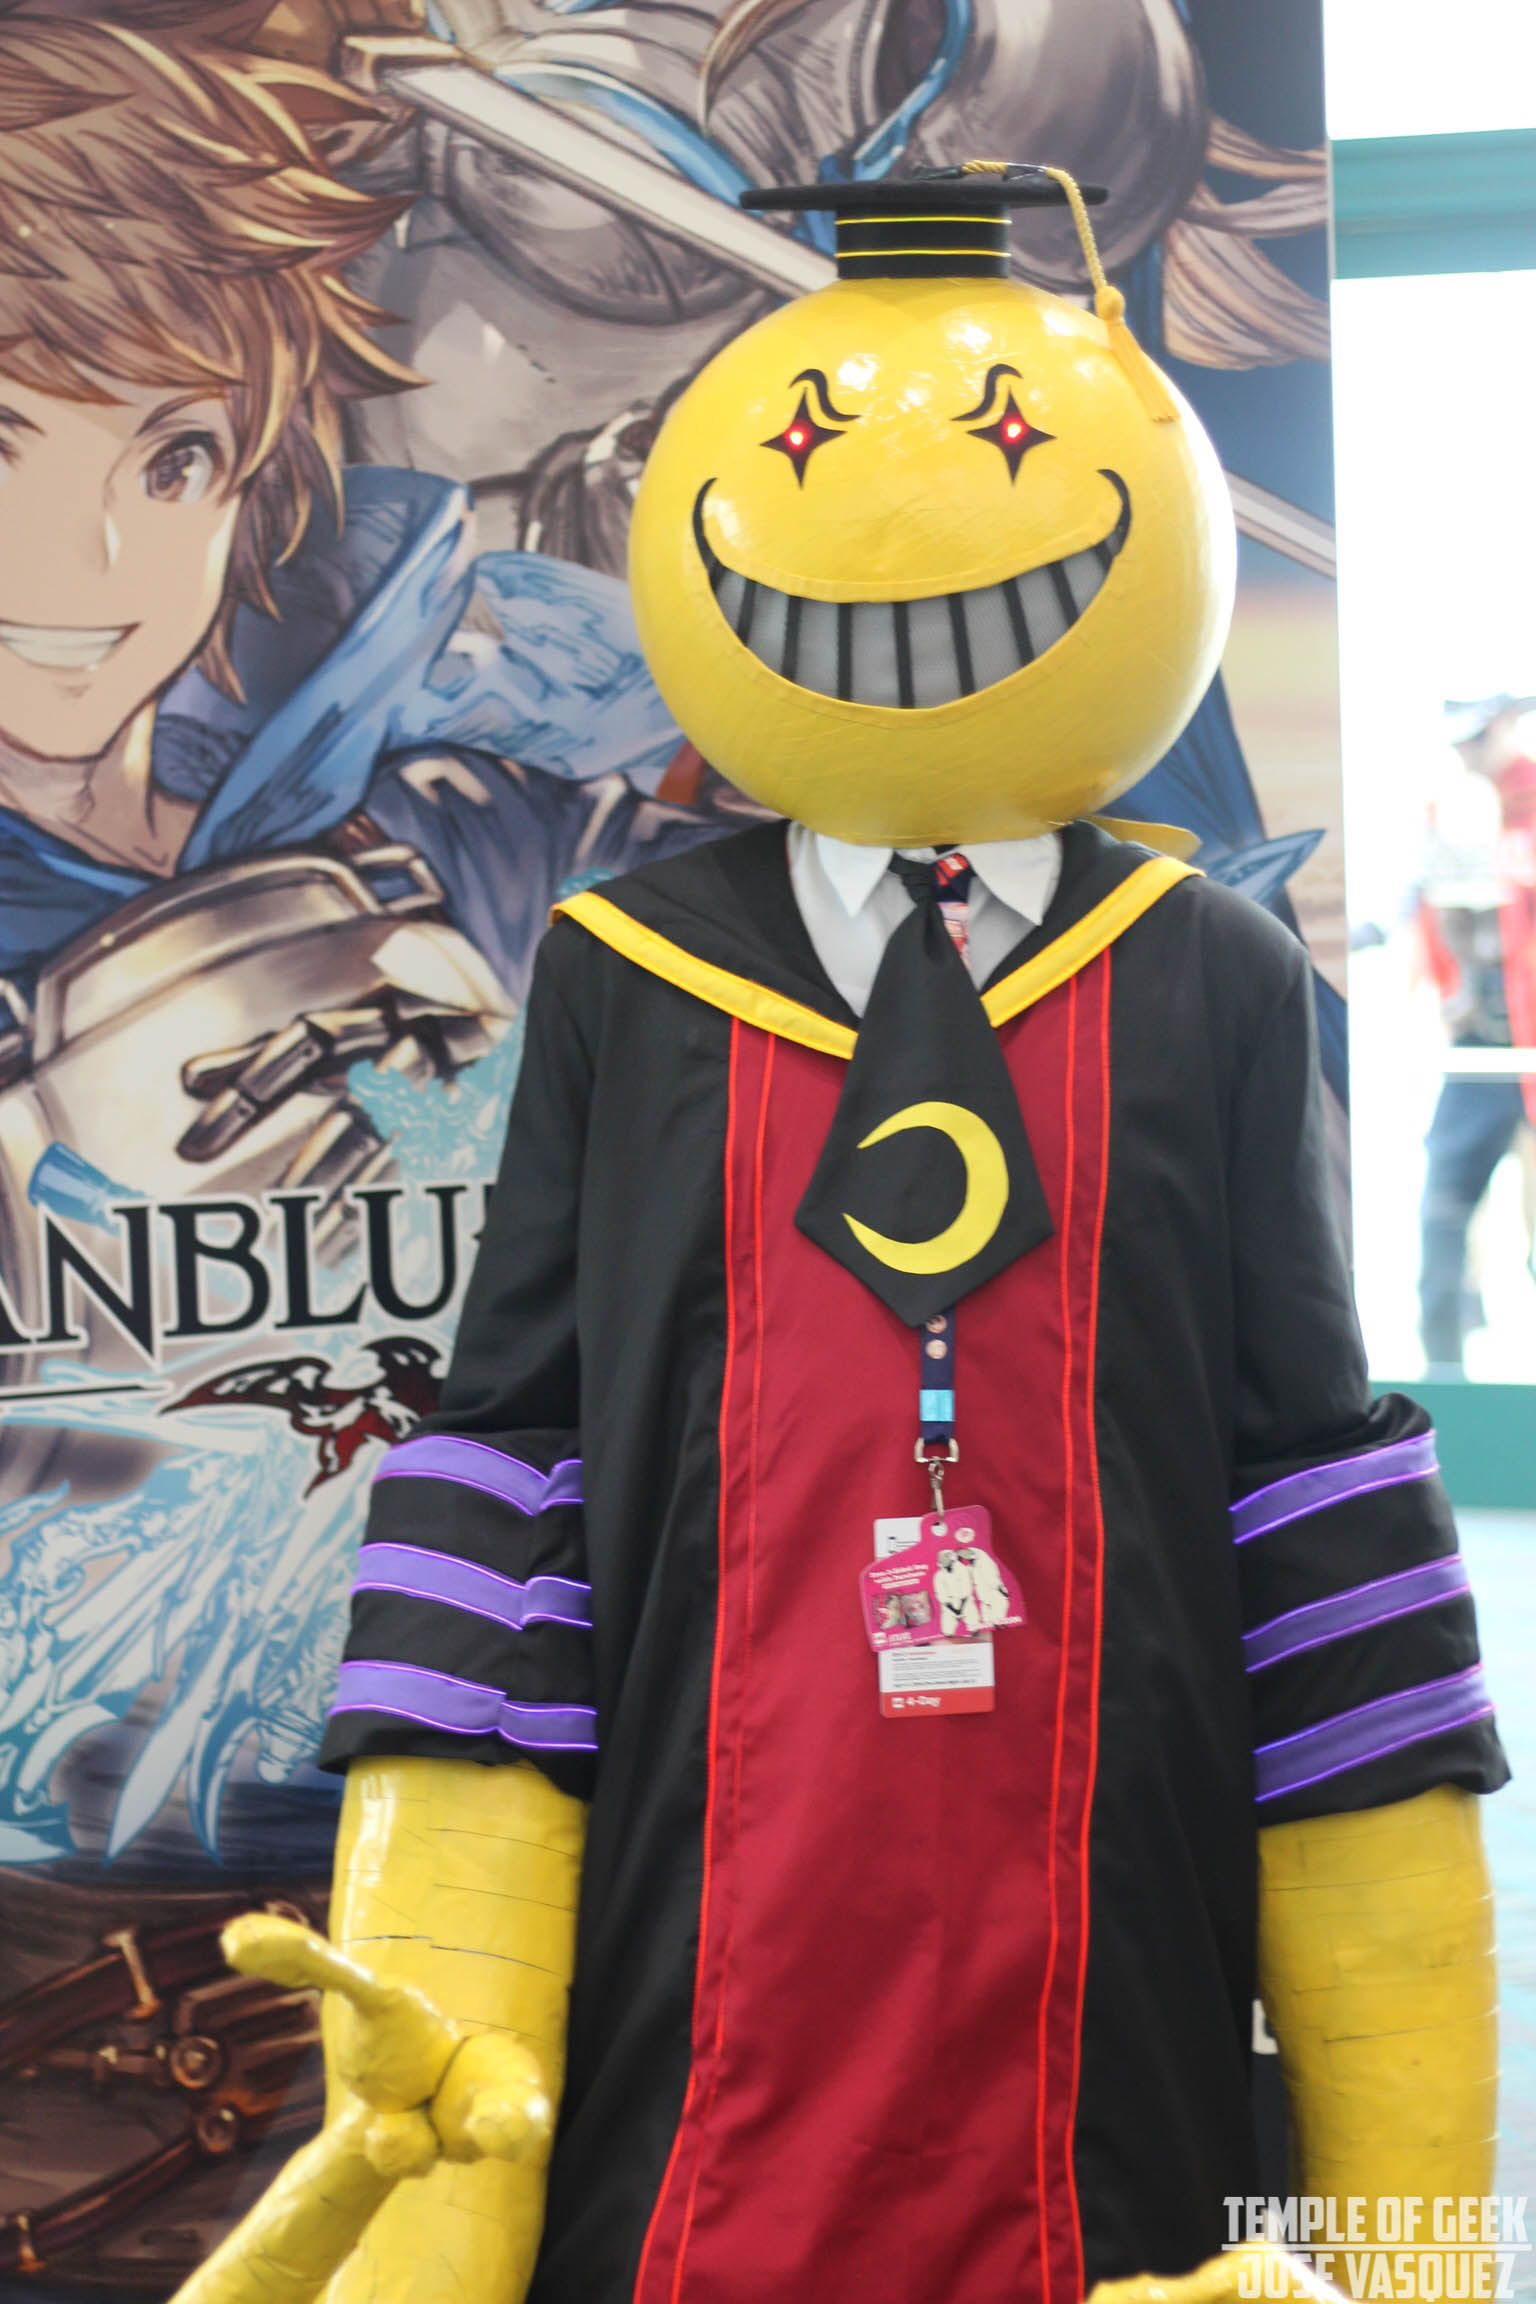 Check out our Anime Expo 2019 Cosplay Gallery Day One